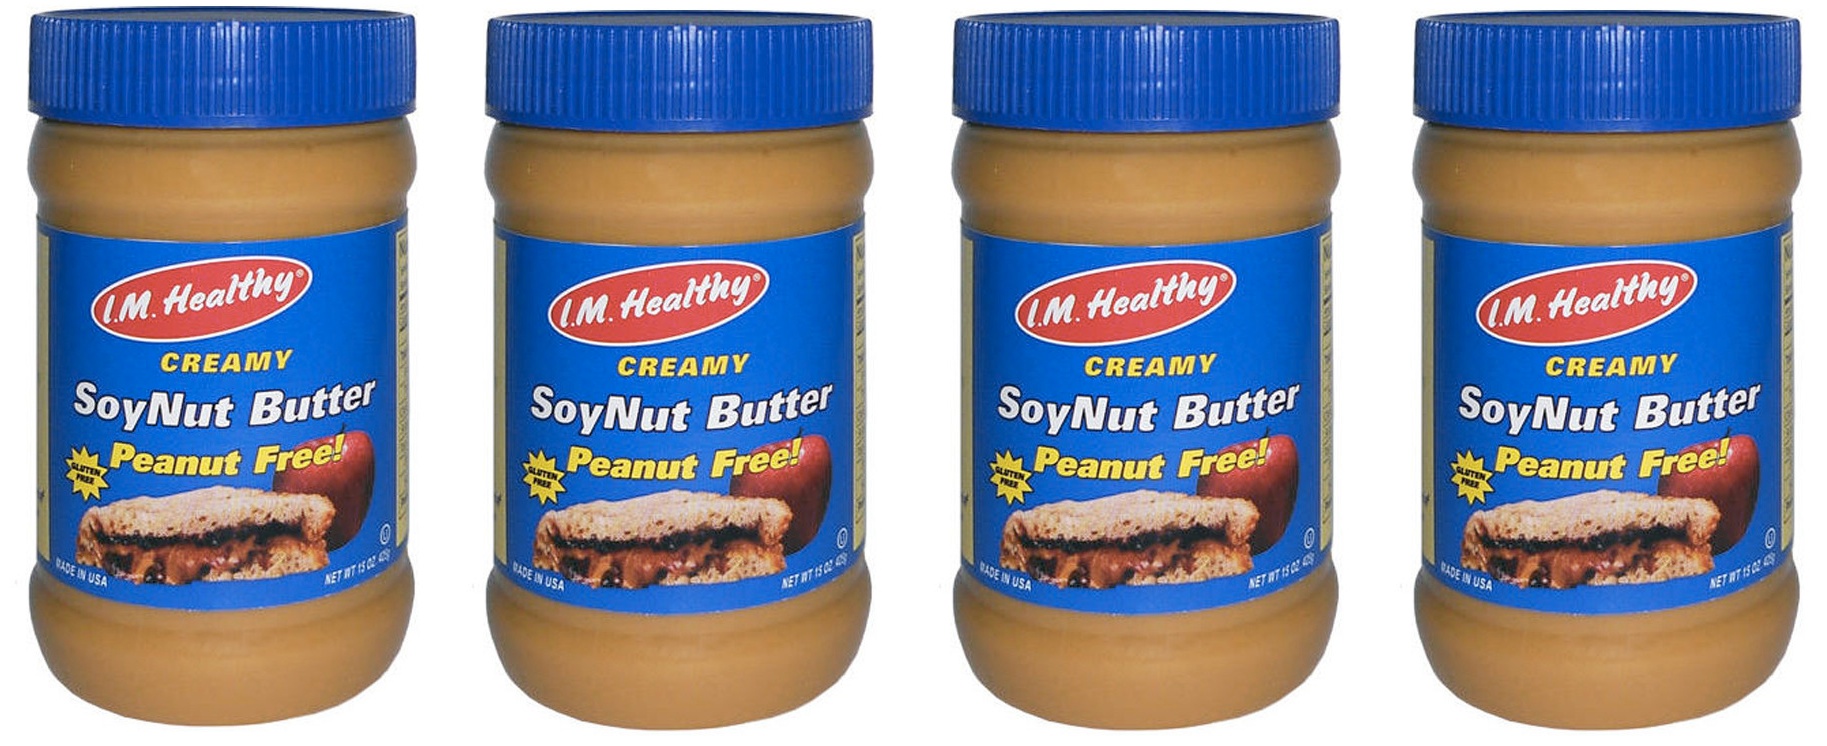 Amazon Seller Offering Expensive, Potentially Contaminated Soy Butter 6 Months After Recall